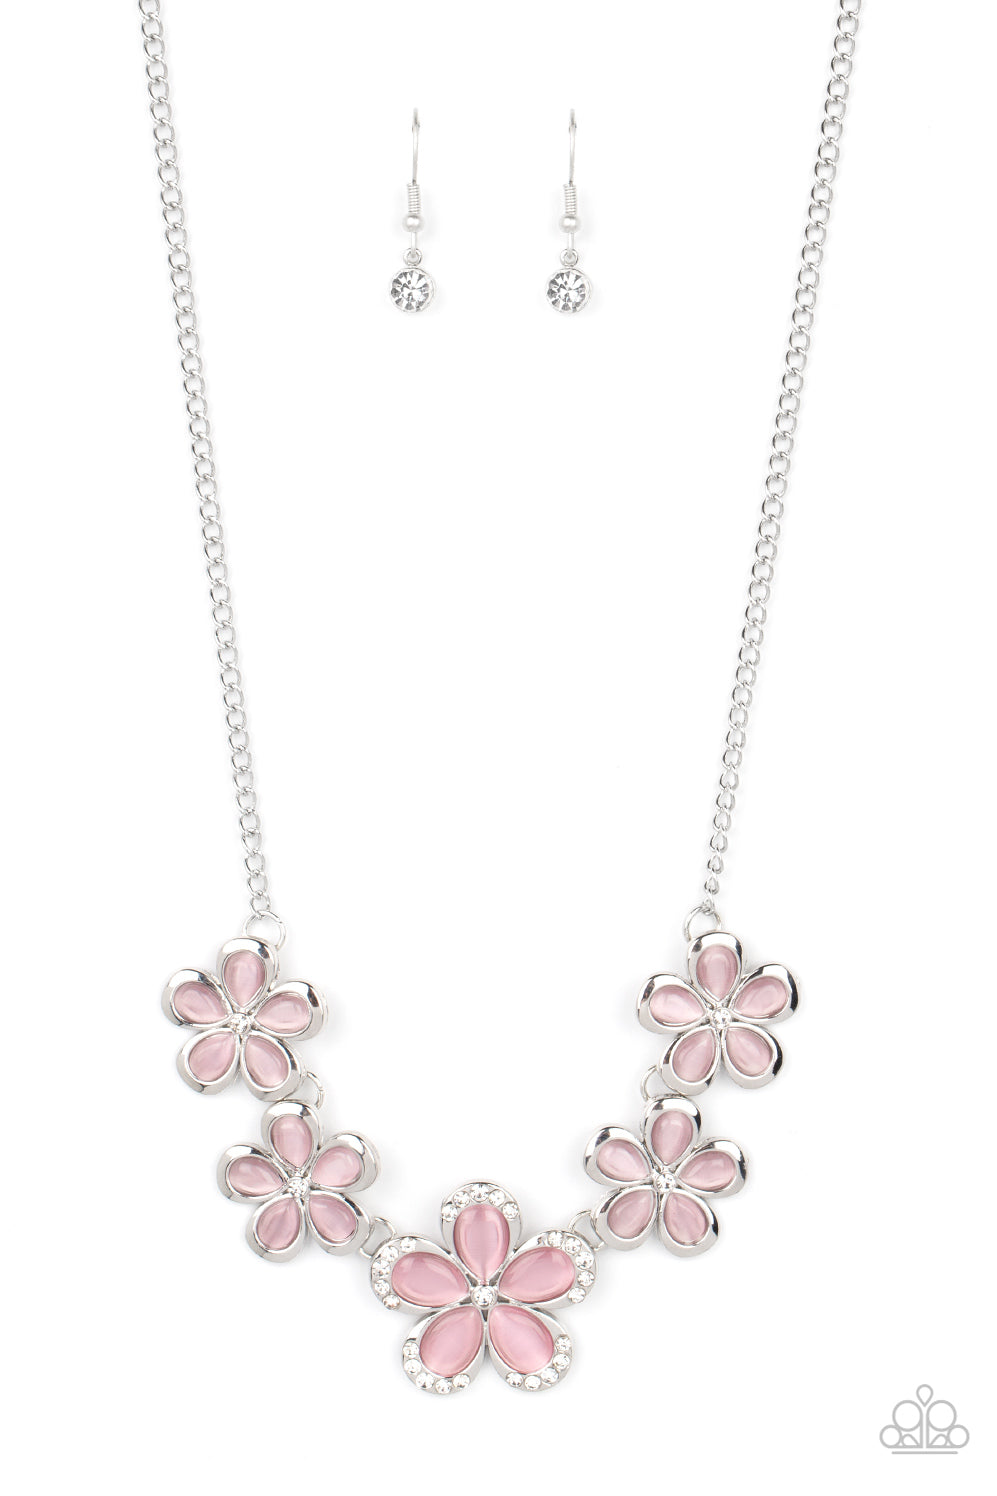 Garden Daydream Pink Necklace - Paparazzi Accessories  Bordered in silver accents, dainty pink cat's eye stone petals bloom from dainty white rhinestone centers, linking into ethereal blossoms below the collar. The centermost daisy is dotted in glassy white rhinestones, adding dazzling dimension to the floral fairytale. Features an adjustable clasp closure.  Sold as one individual necklace. Includes one pair of matching earrings.  P2RE-PKXX-361XX